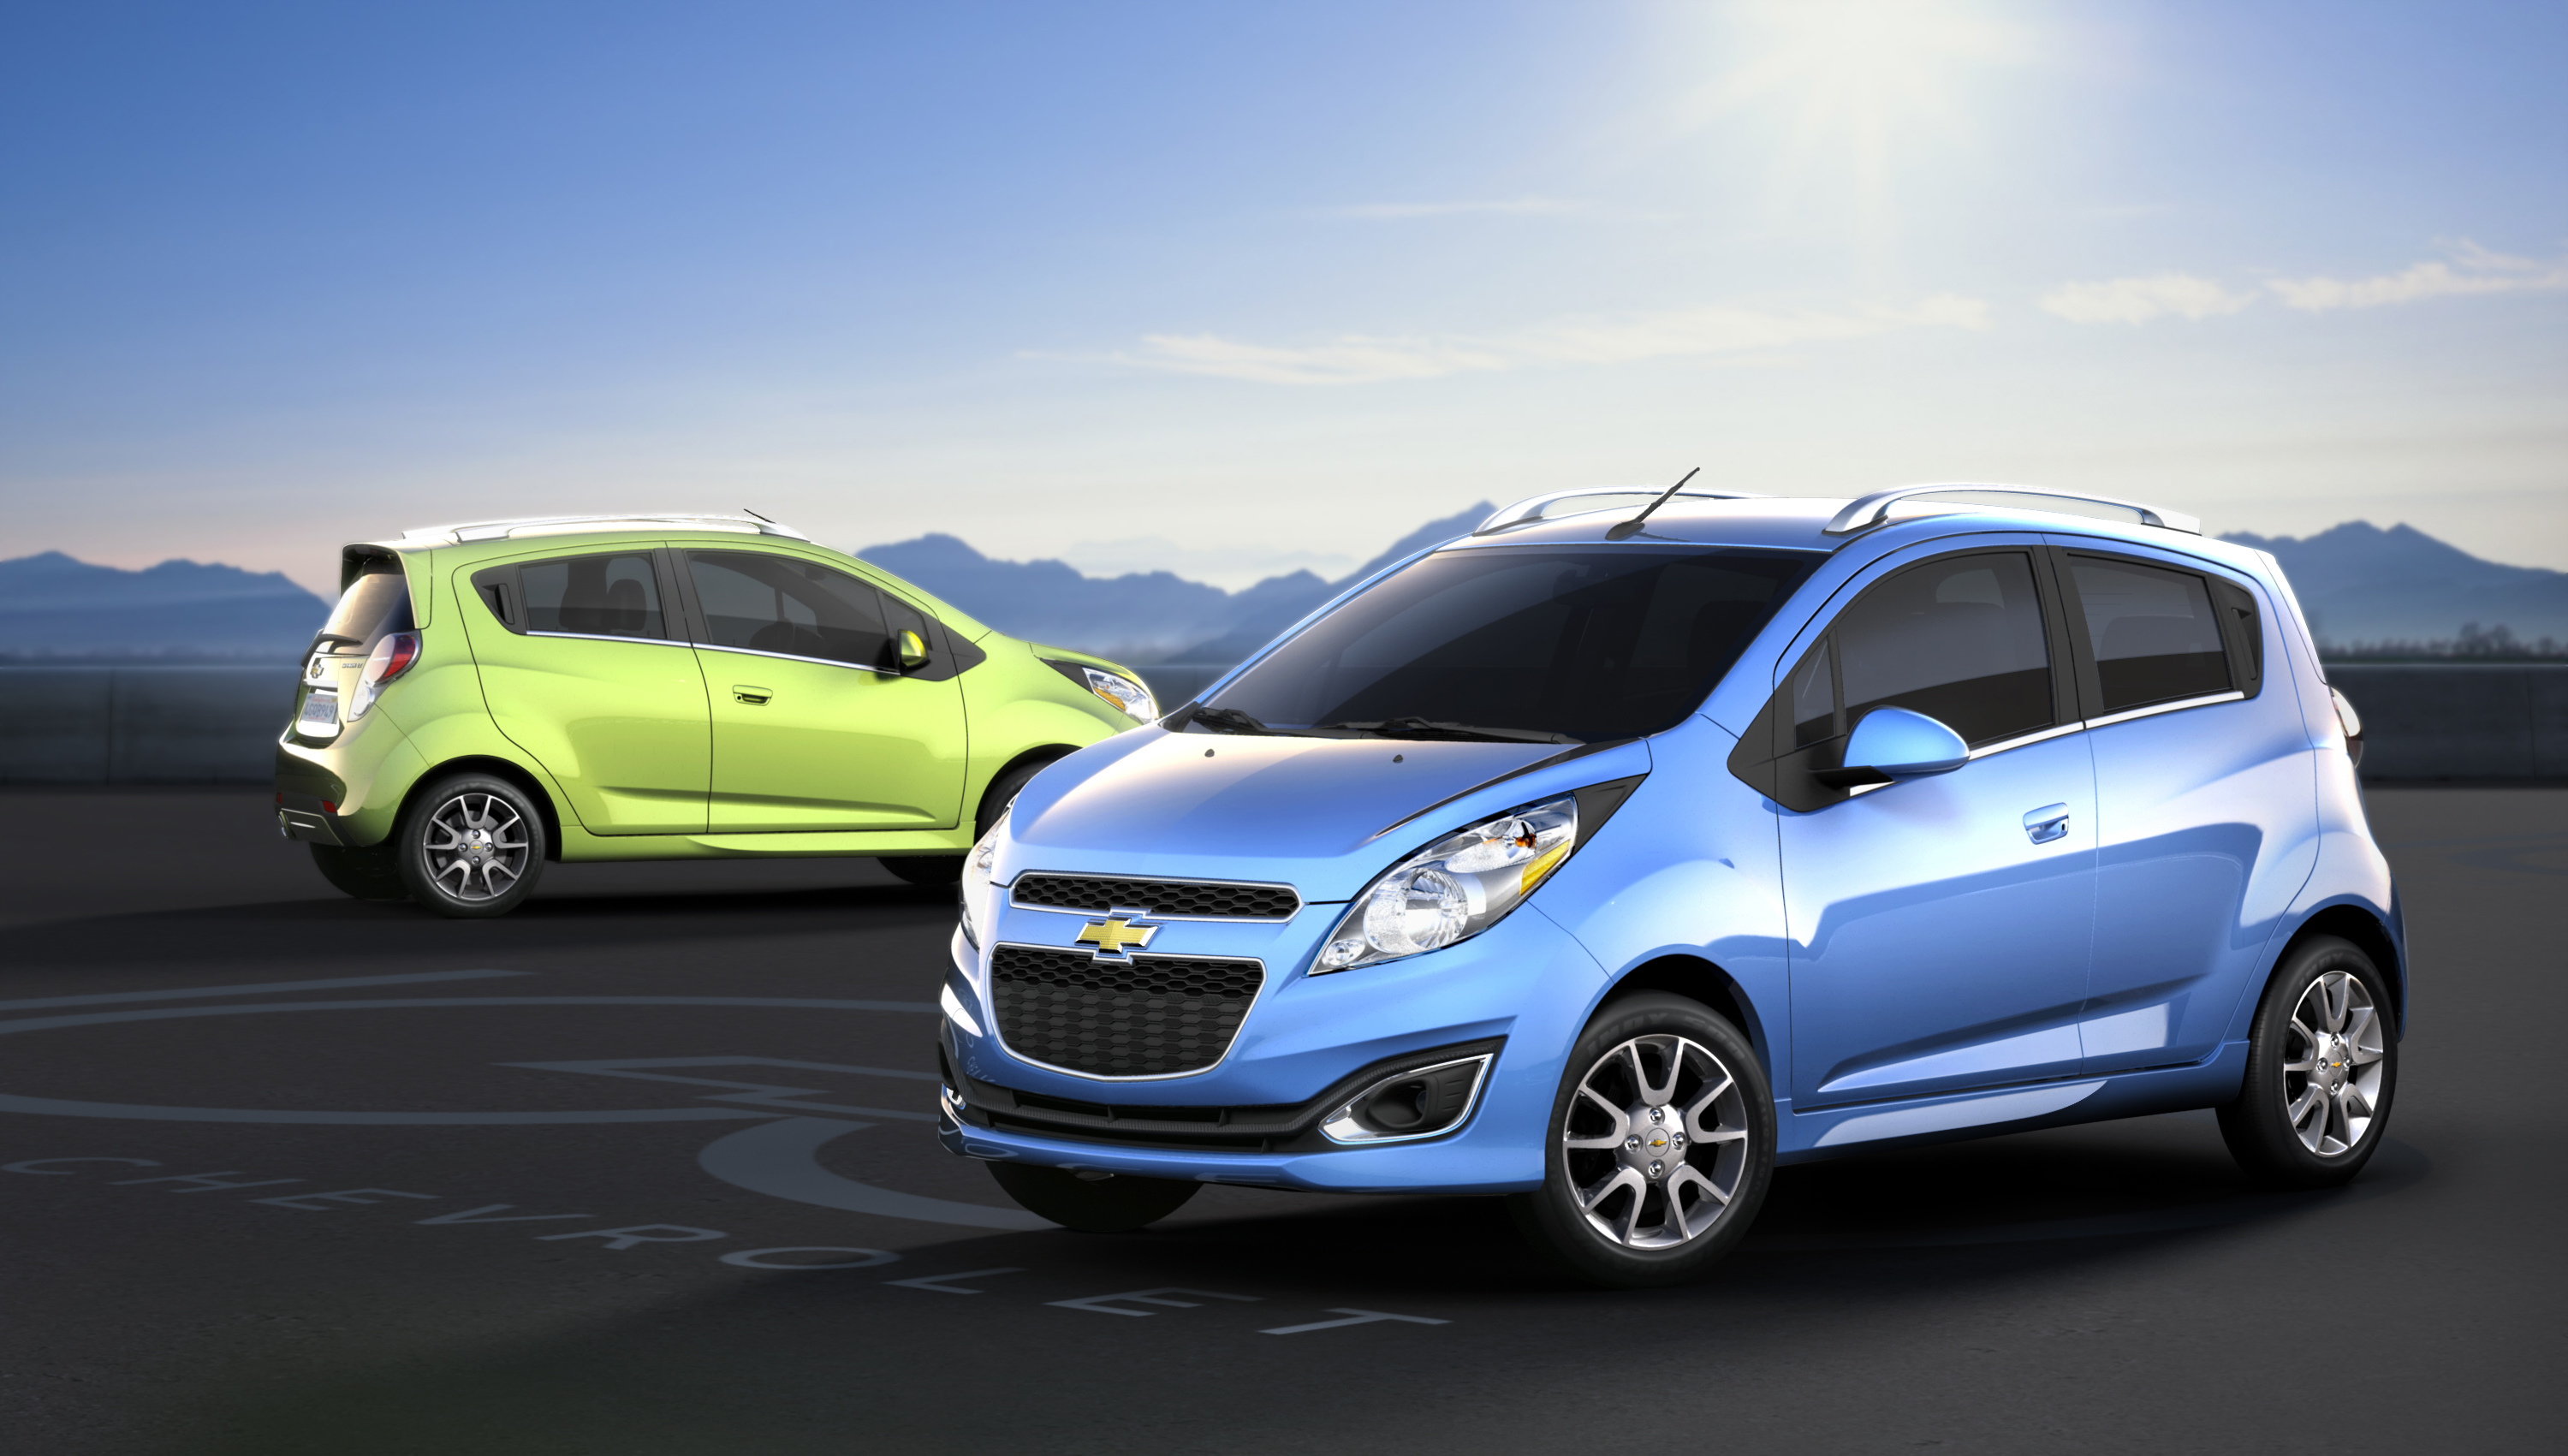 2013 Chevrolet Spark (Chevy) Review, Ratings, Specs, Prices, and Photos -  The Car Connection